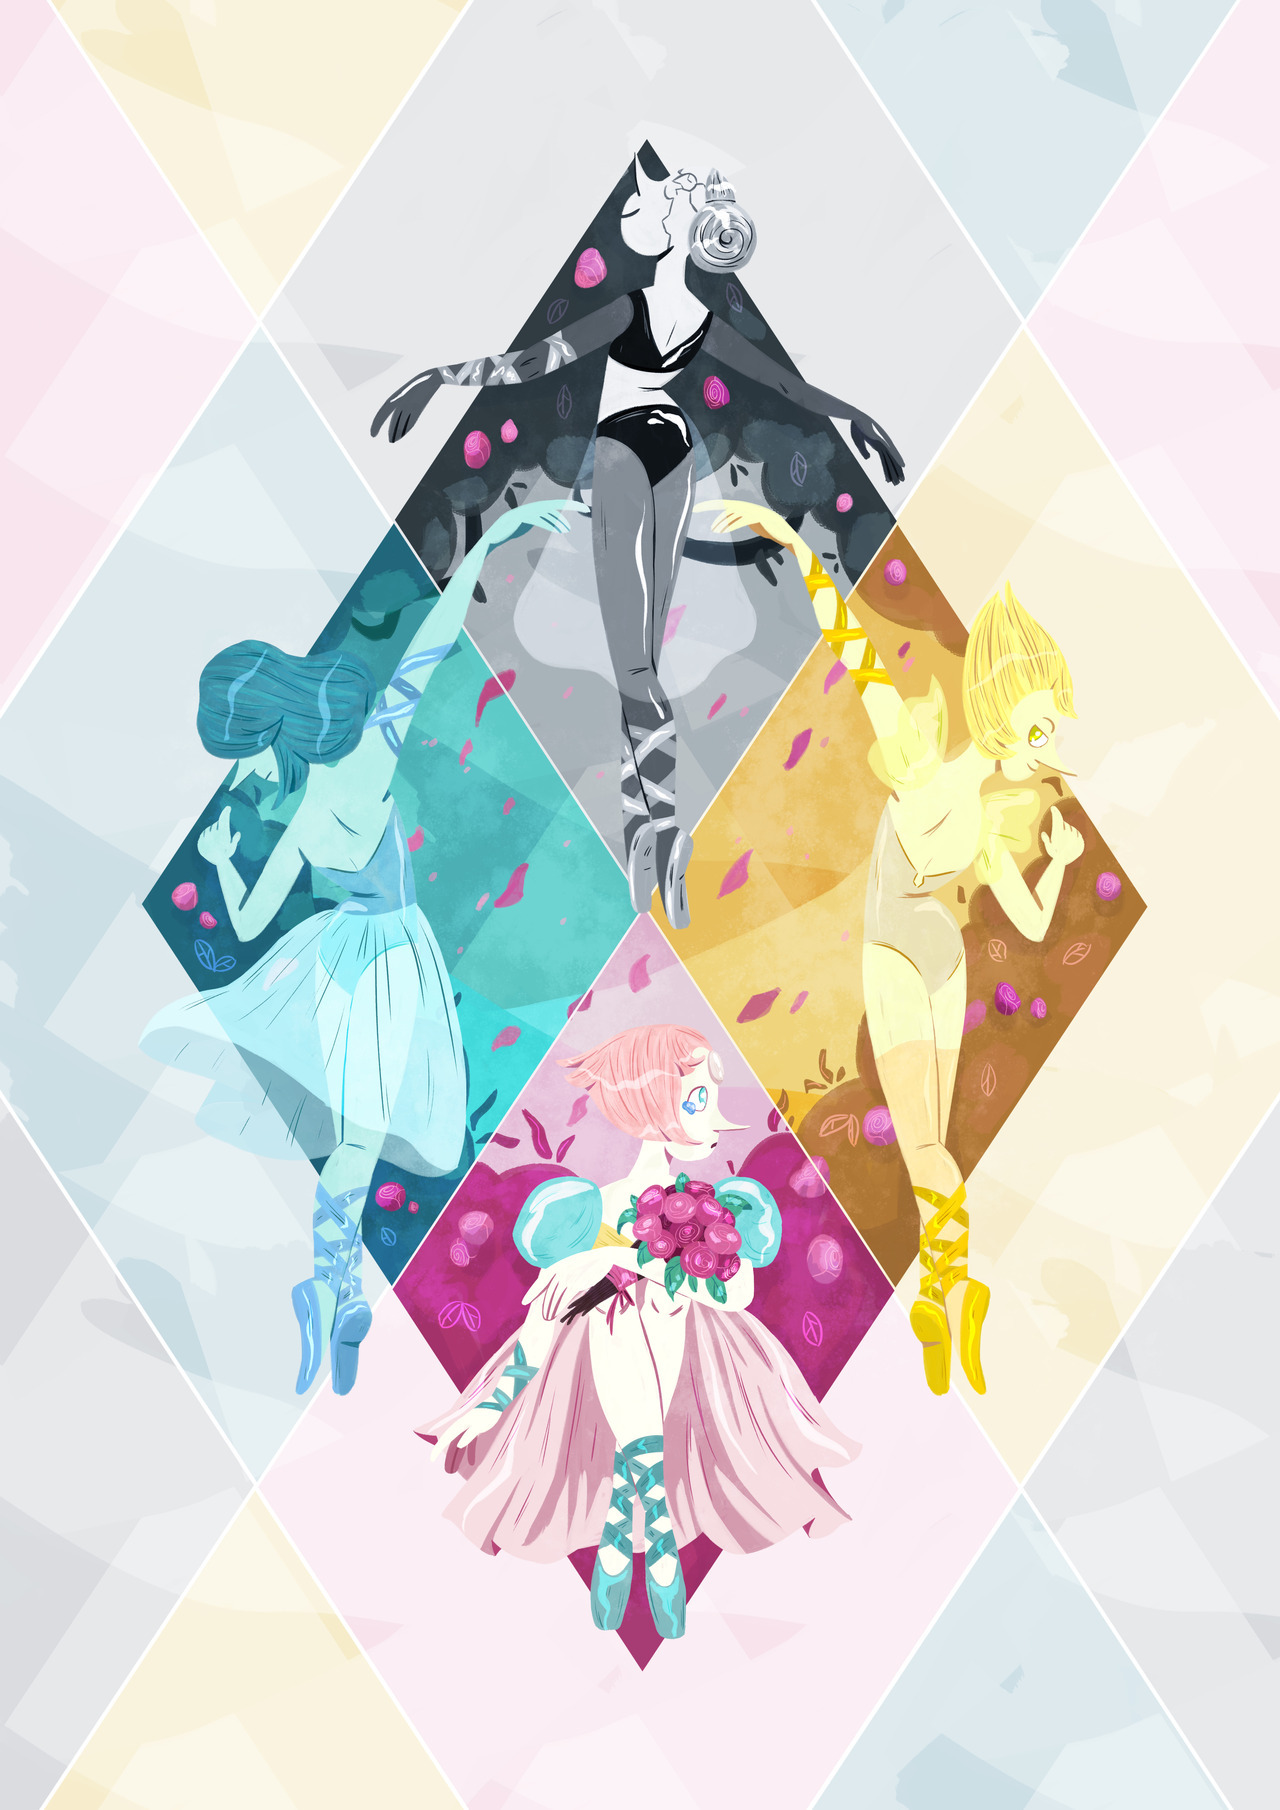 Pearls! New print for Madfest